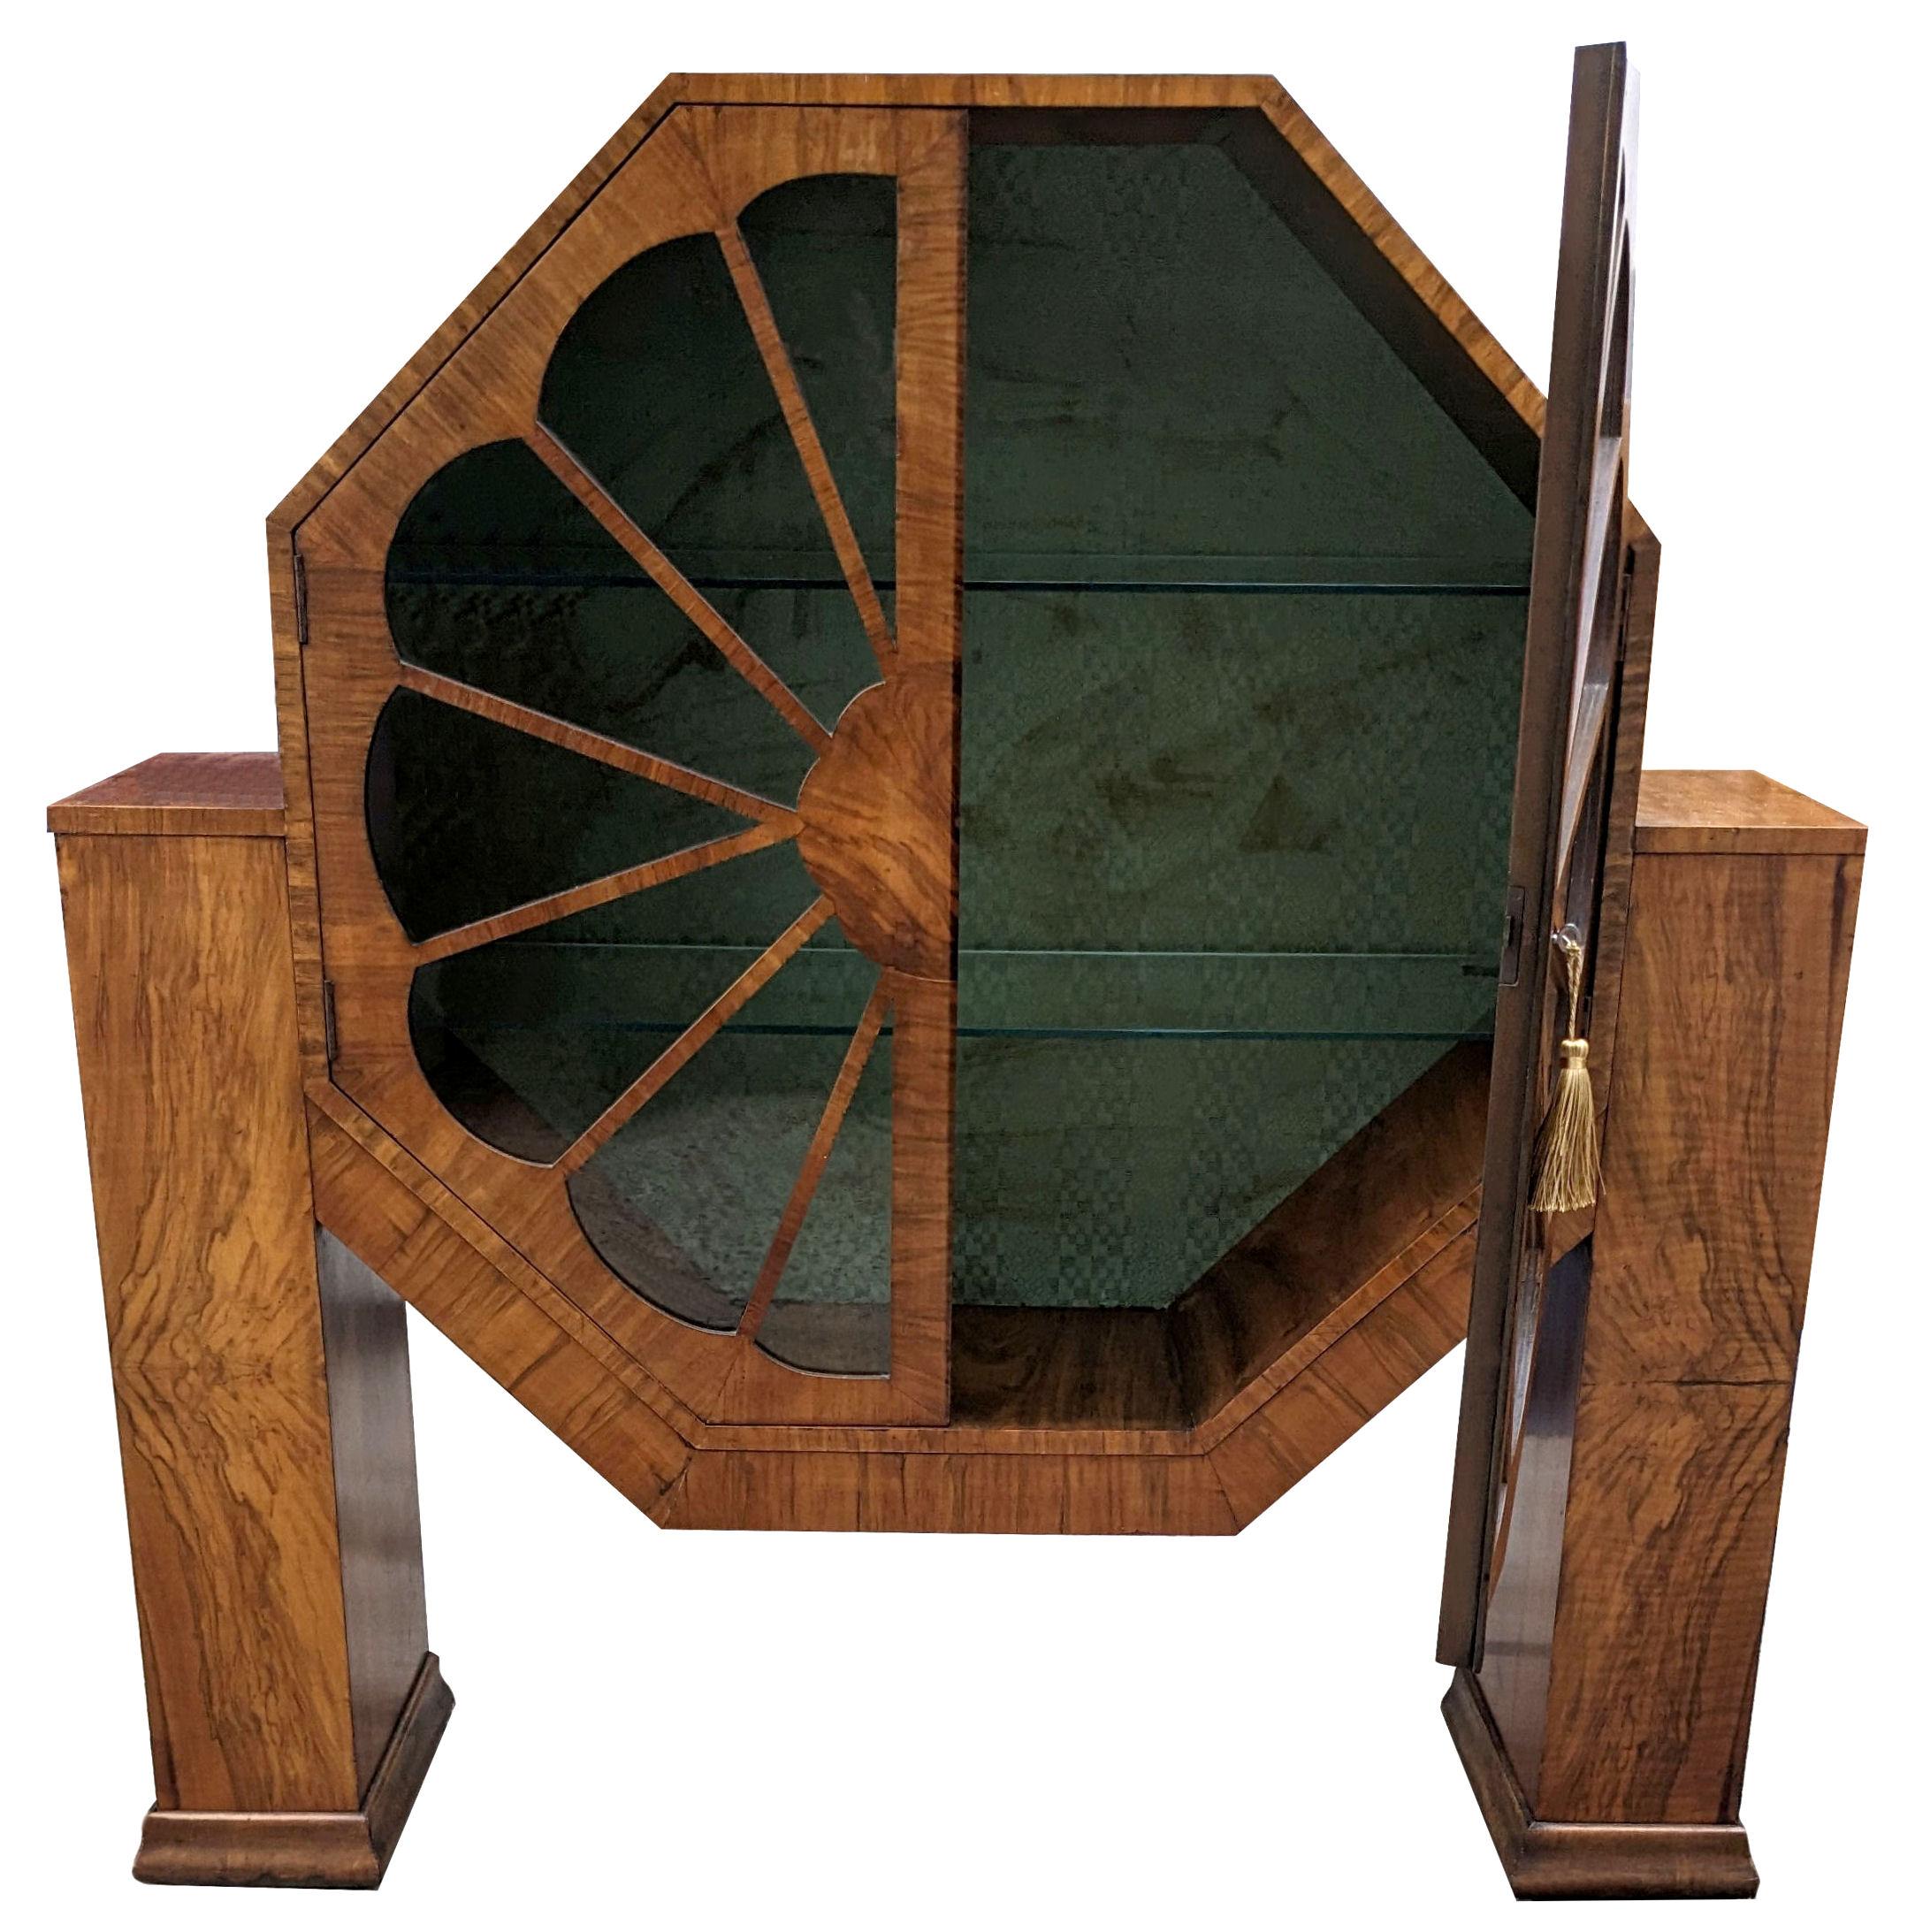 This is a fabulous opportunity to acquire a genuinely rare design Art Deco display cabinet, this being one of the best examples in figured walnut. If you want a focal point or a wow factor in a room then this is just the ticket. Not only does it